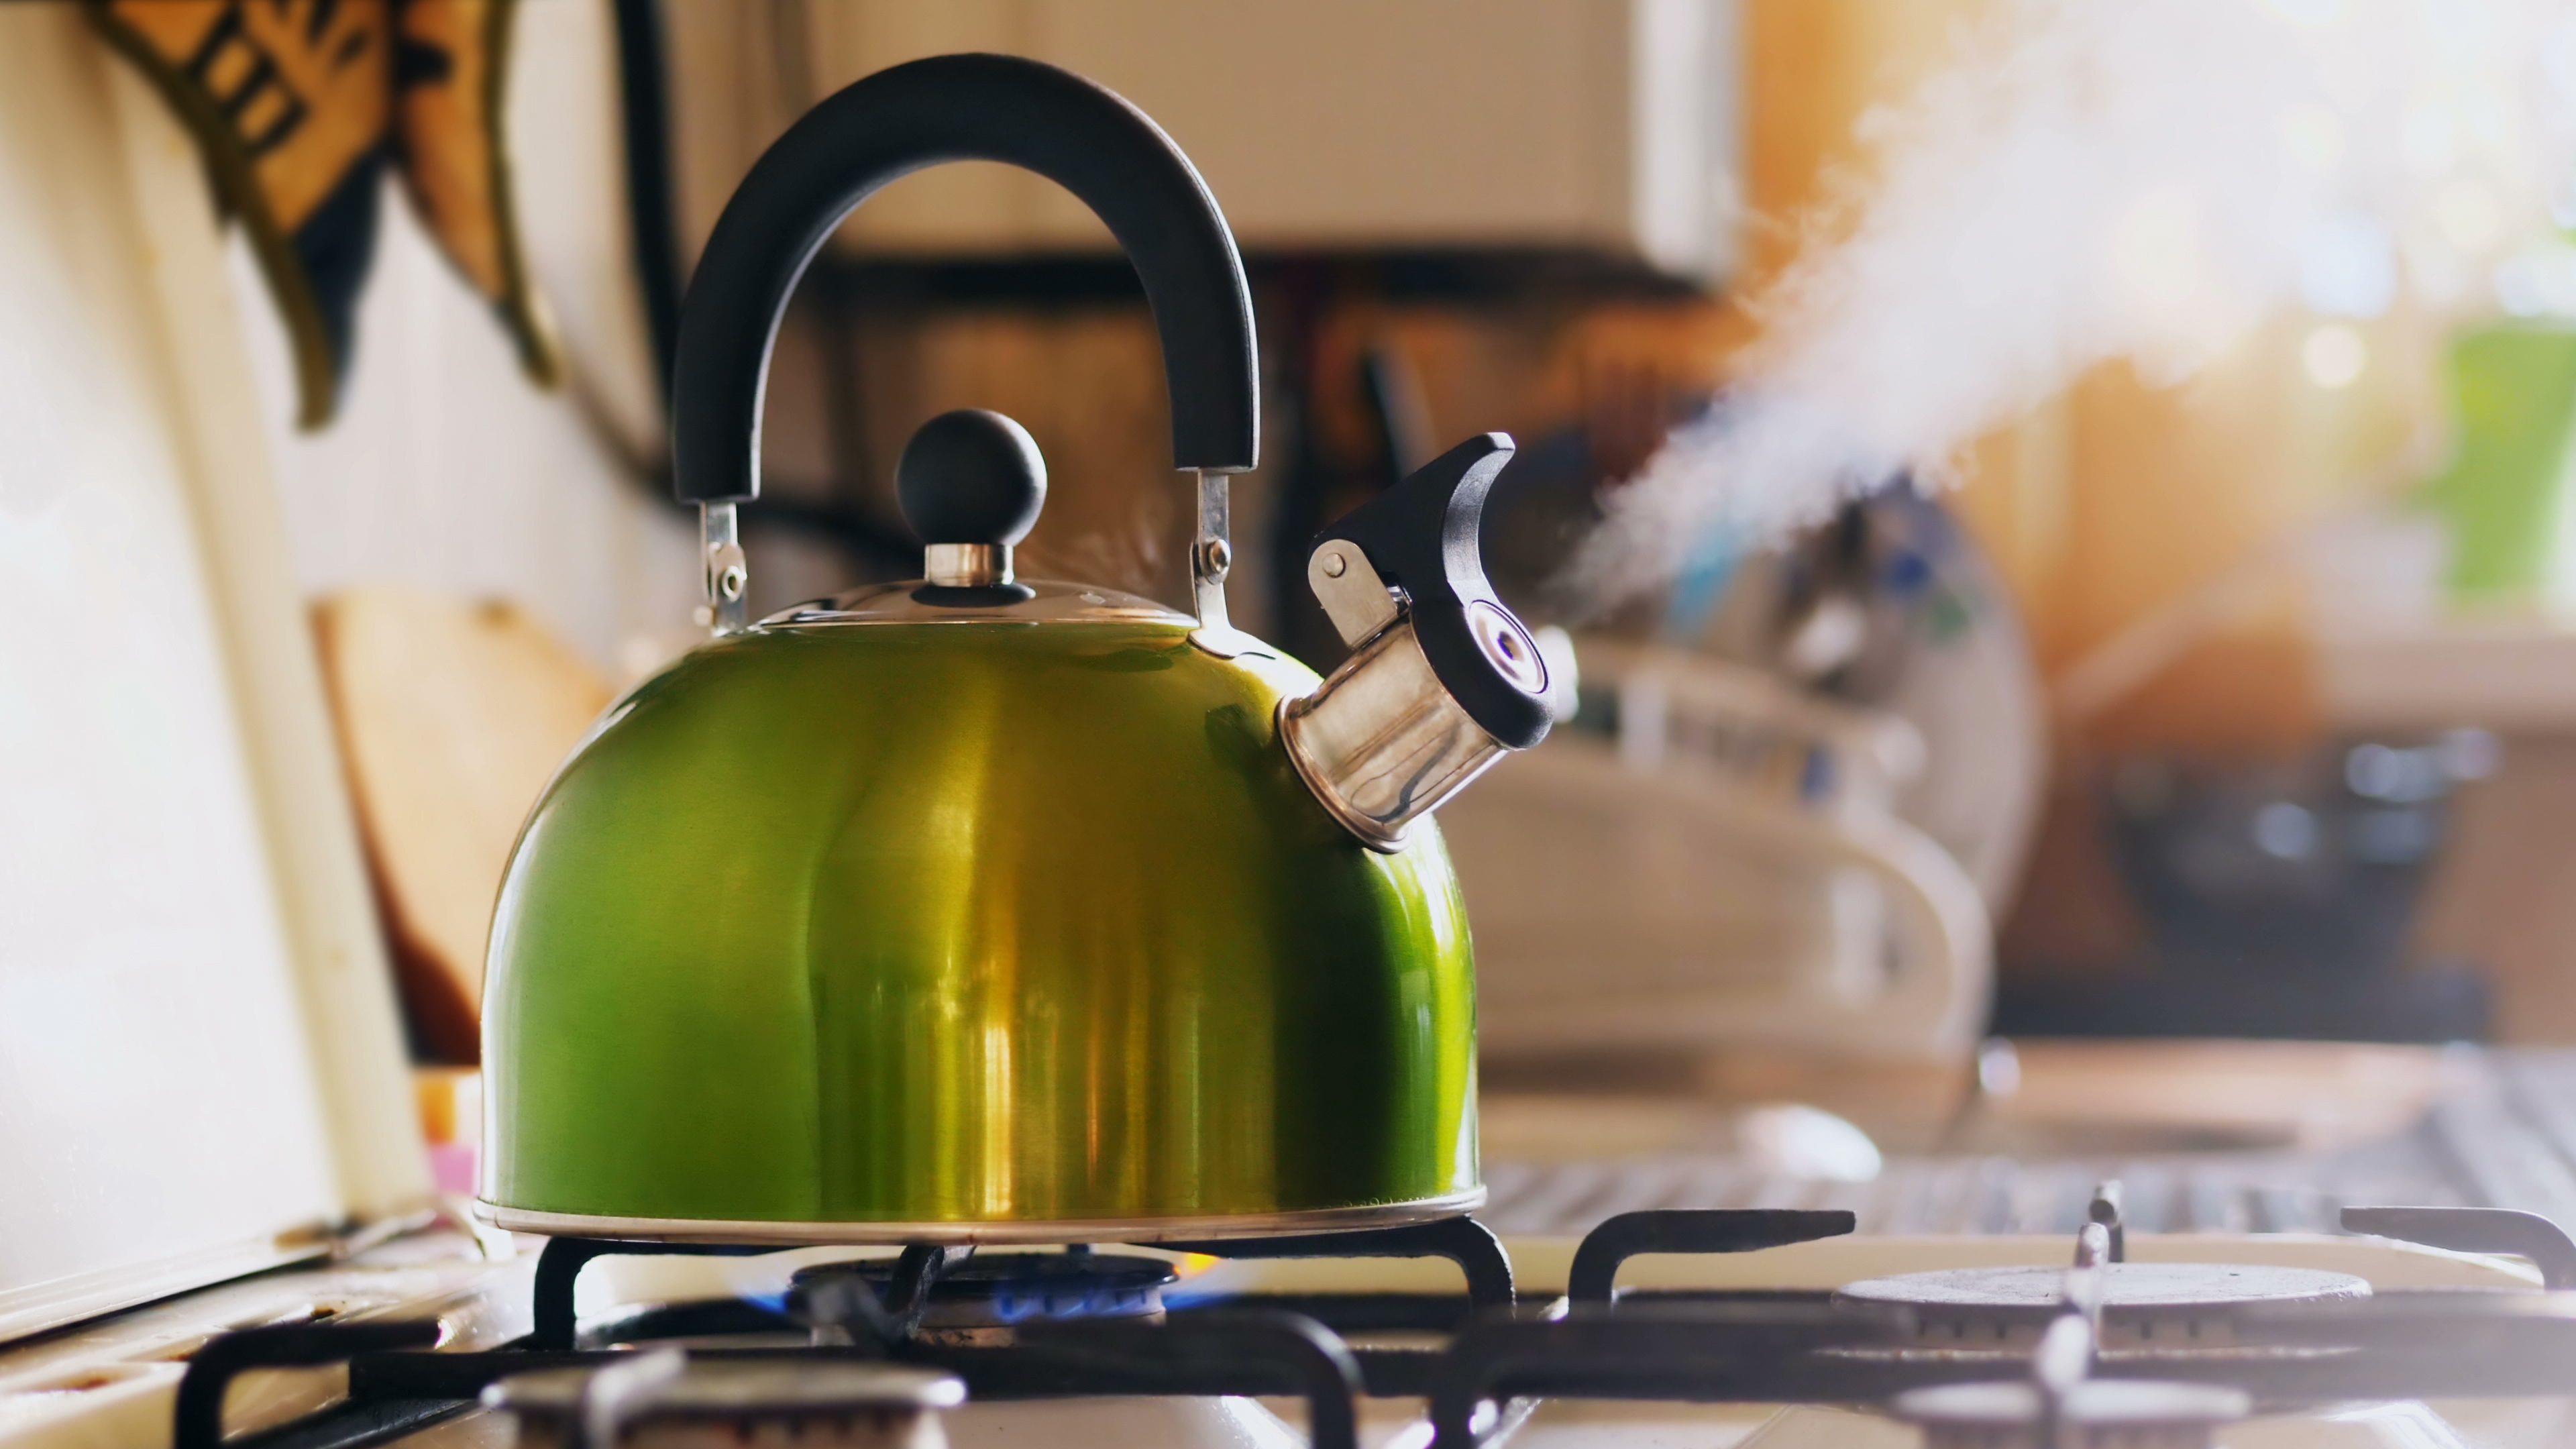 Green stove kettle on a stove boiling water